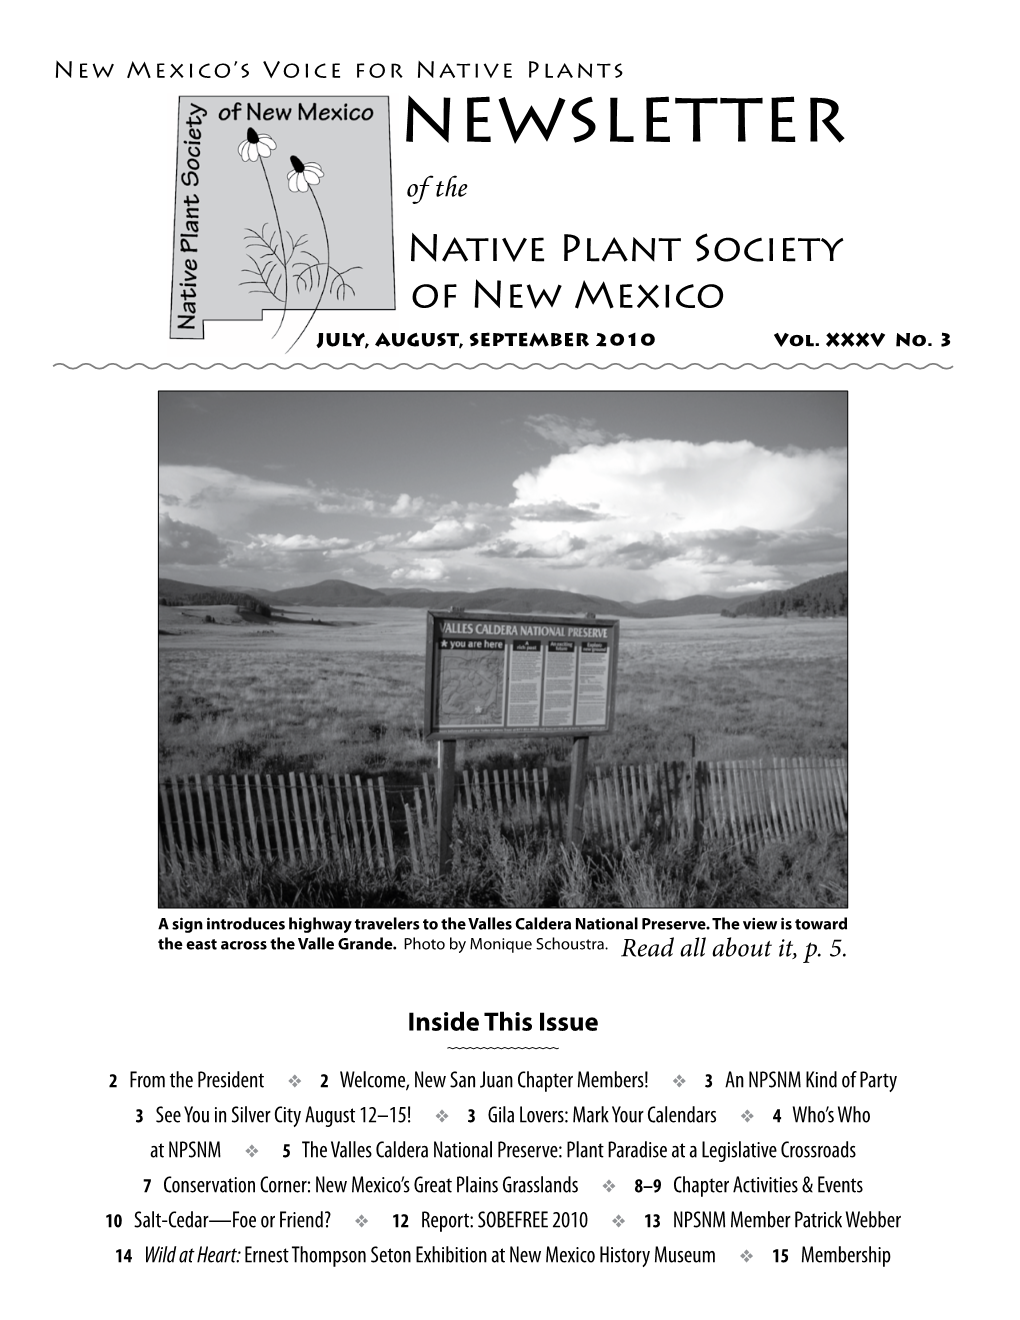 Newsletter of the Native Plant Society of New Mexico JULY, AUGUST, SEPTEMBER 2010 Vol